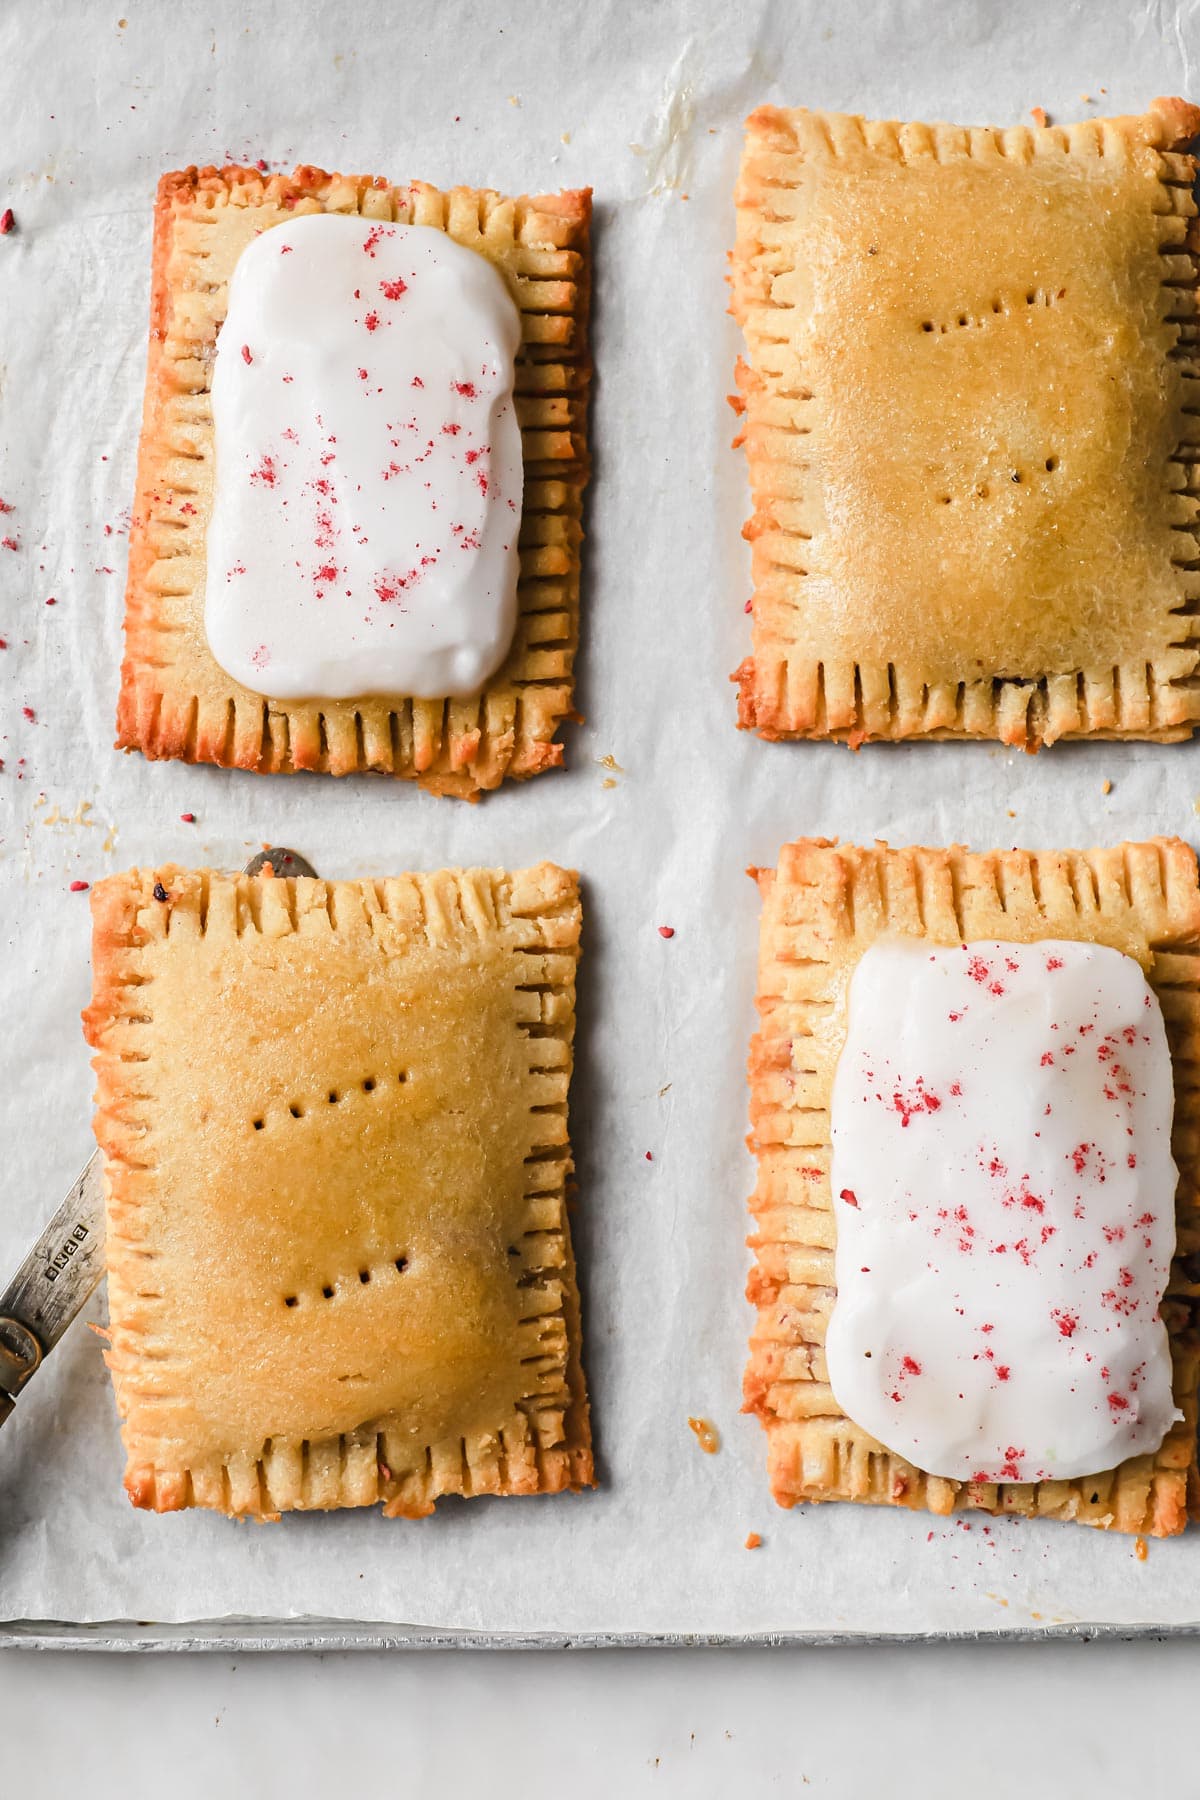 pop tarts on a baking tray - two with icing and two with an egg wash